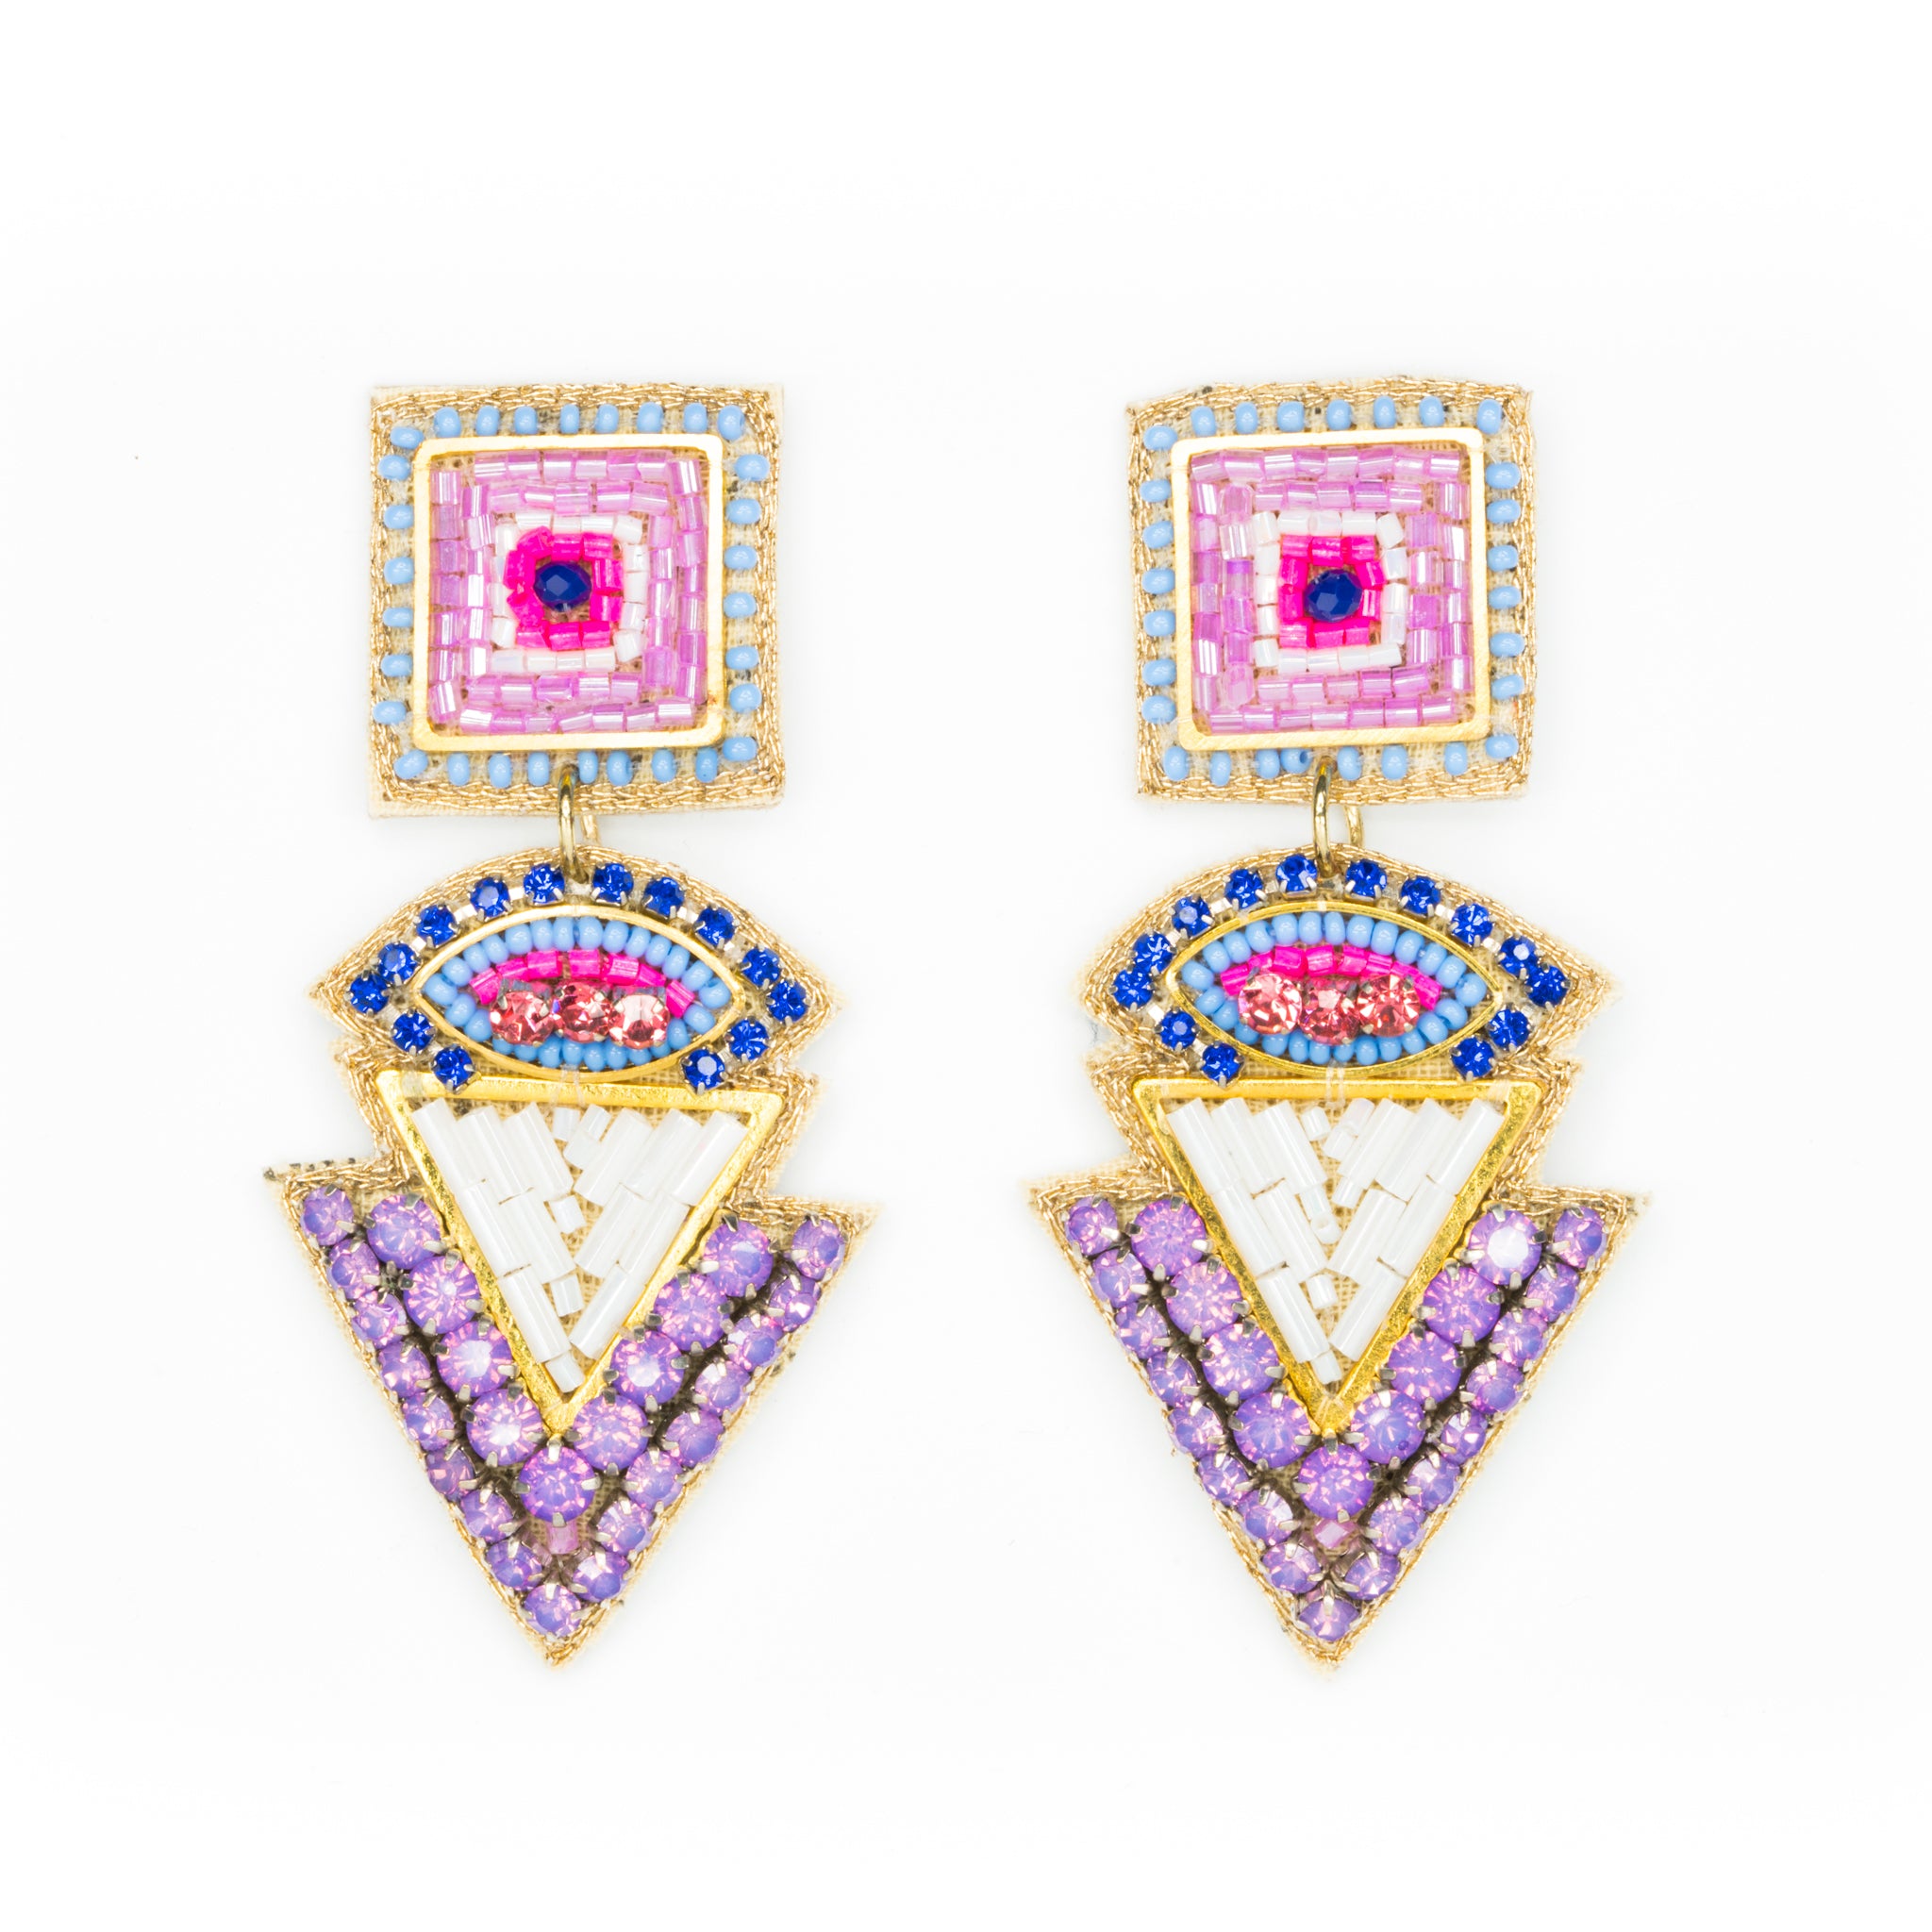 Bay Street Earrings in Shades of Purple and Blue